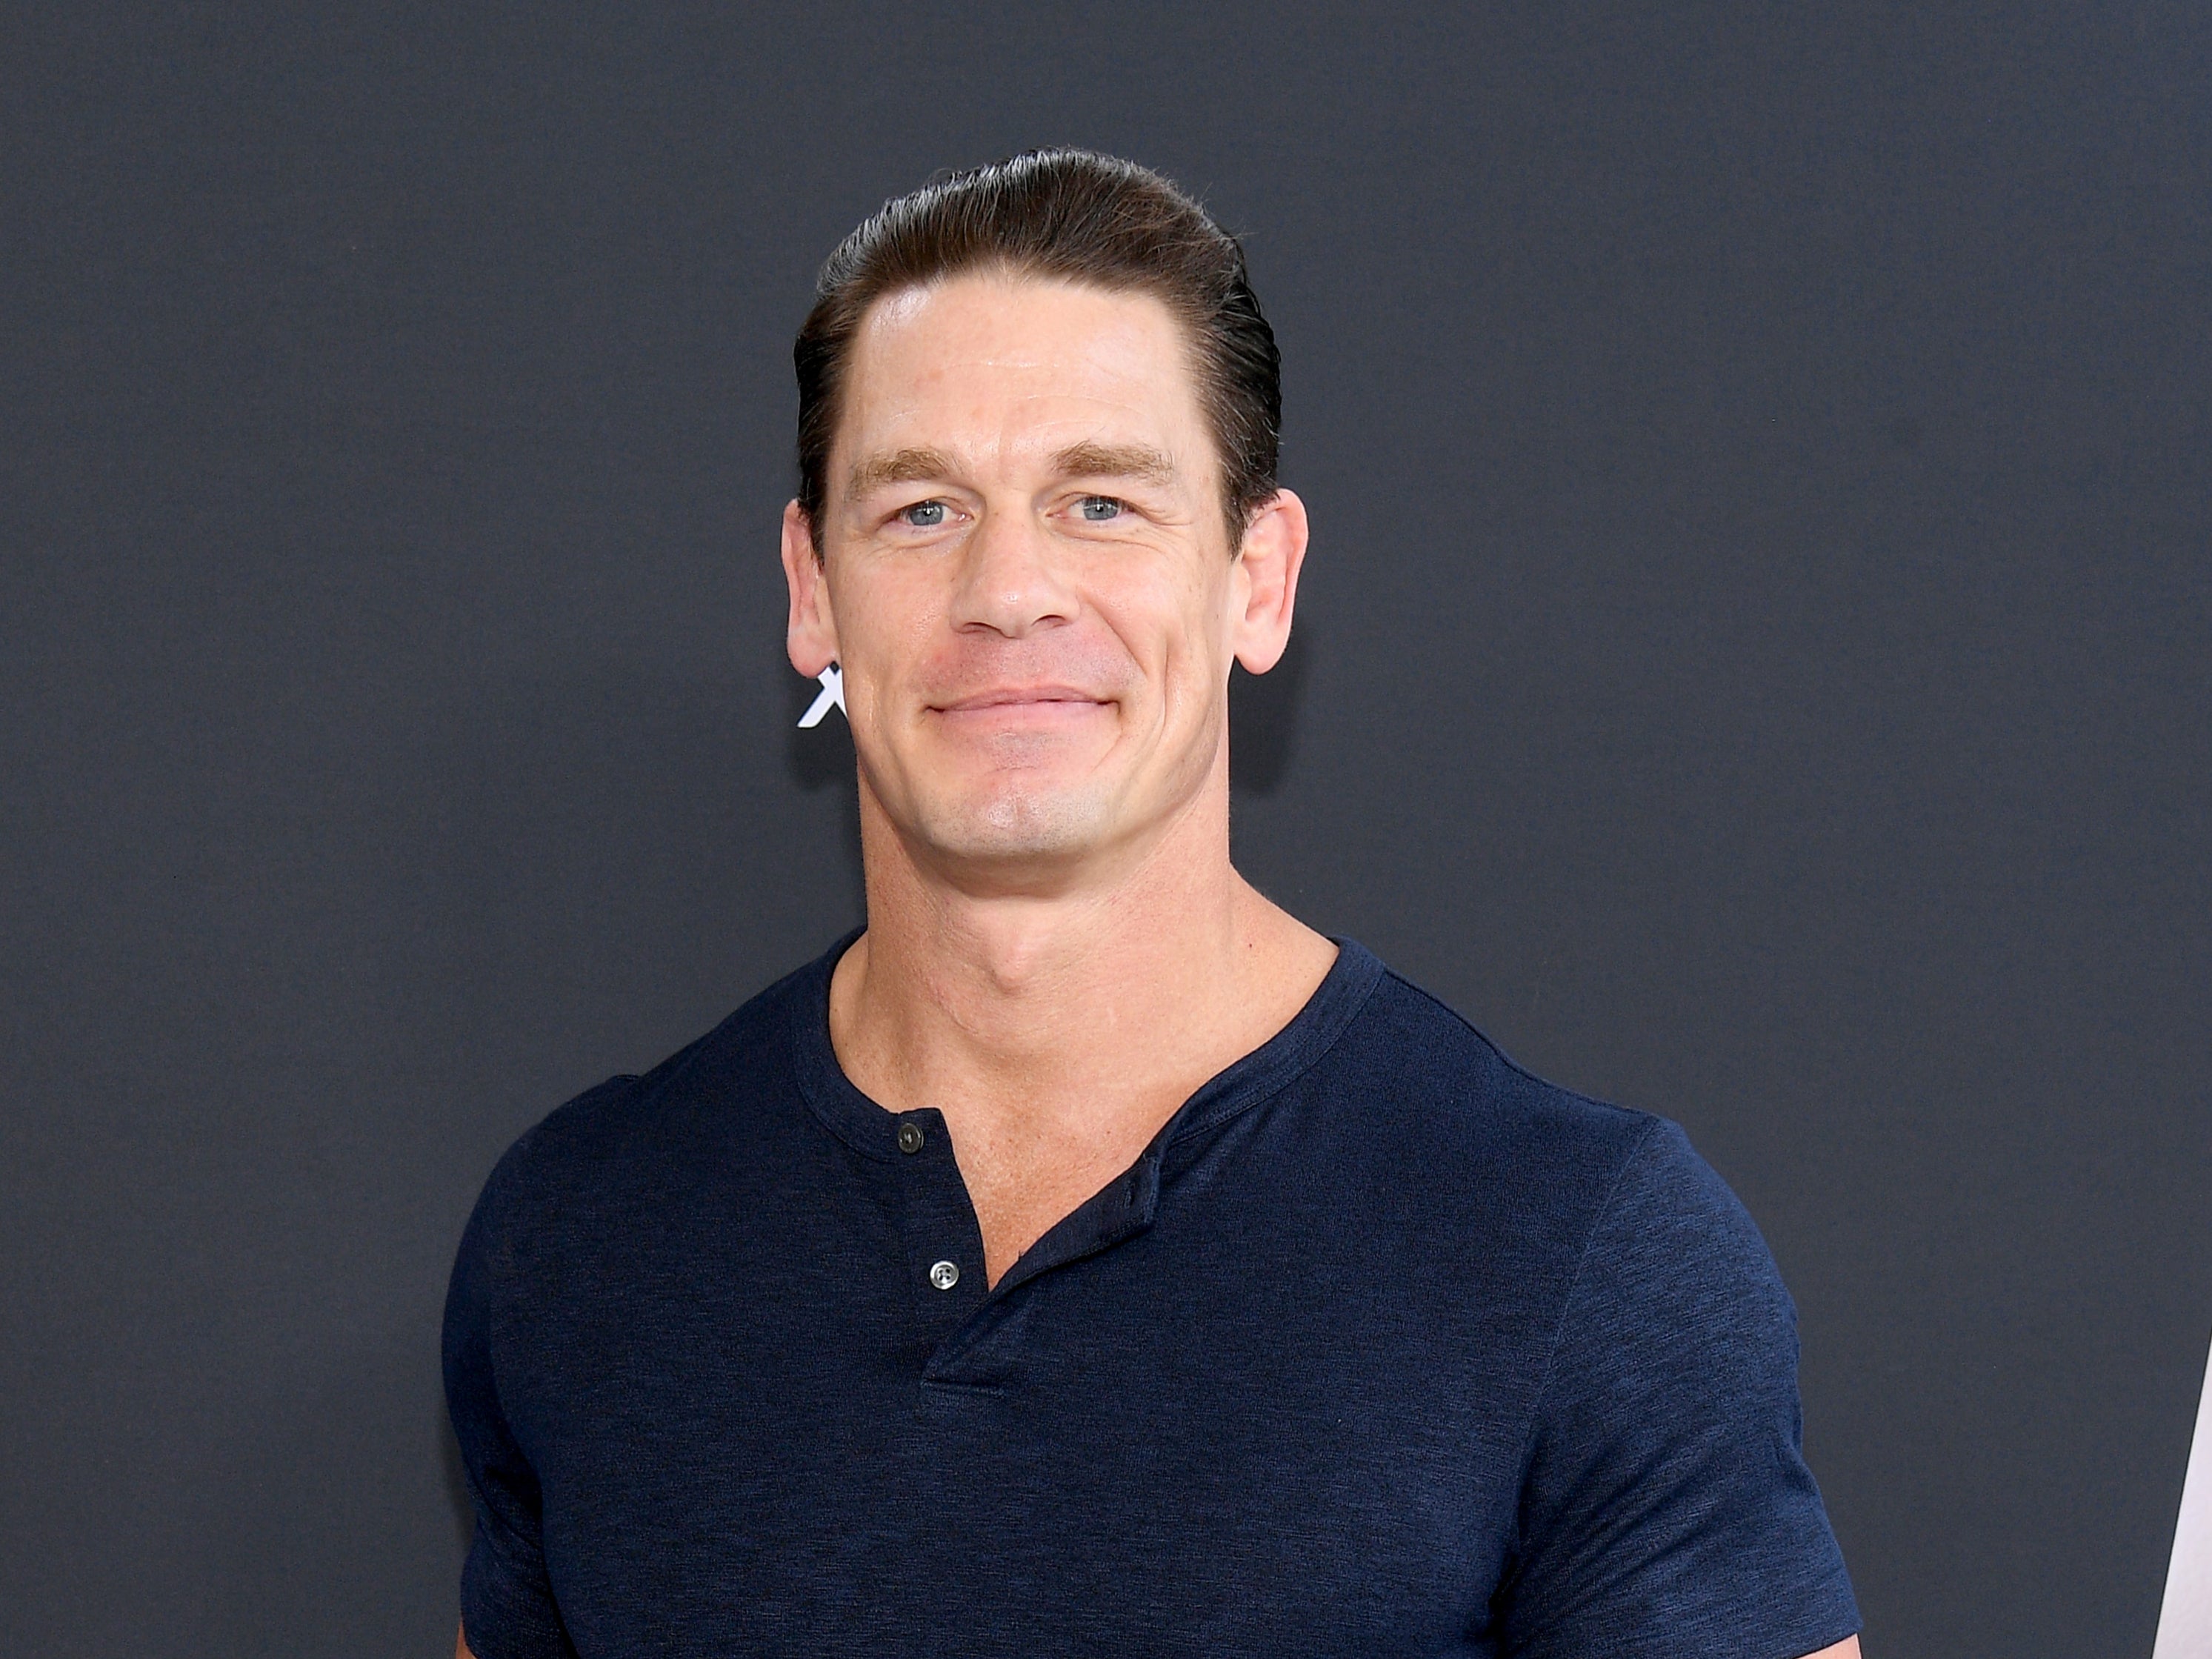 John Cena attends an F9 promotional event on 31 January 2020 in Miami, Florida